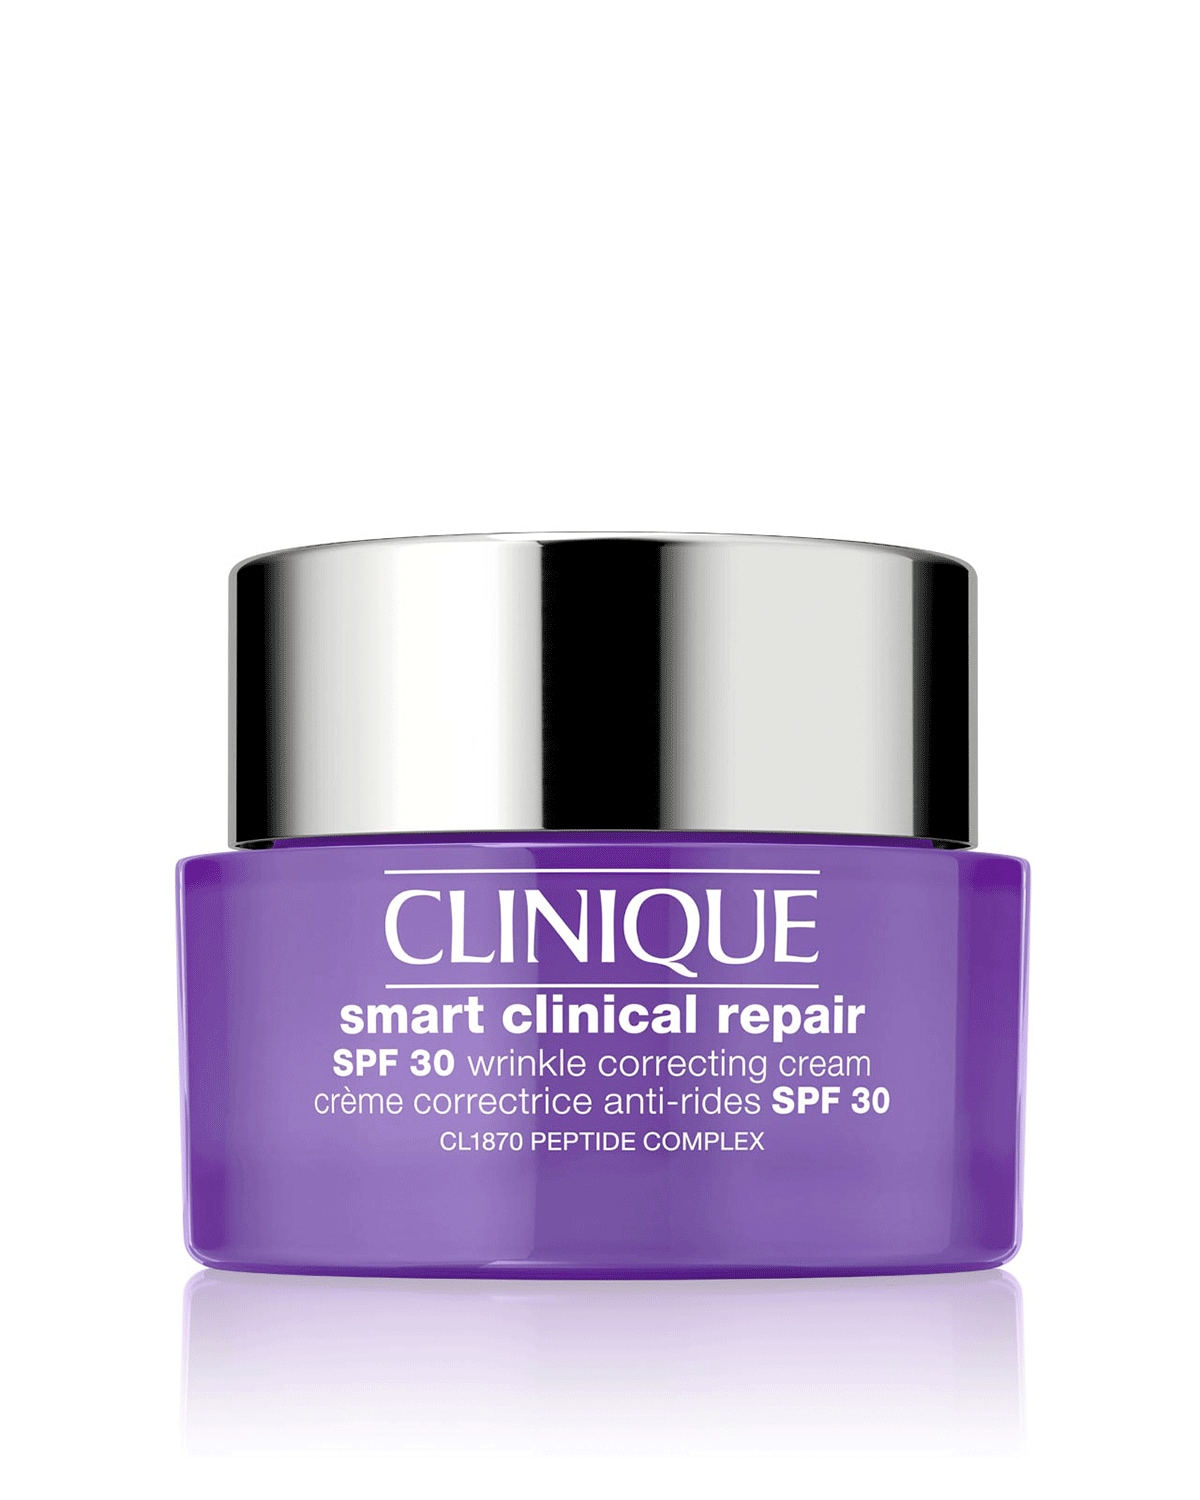 NEW Clinique Smart Clinical Repair™ SPF 30 Wrinkle Correcting Cream